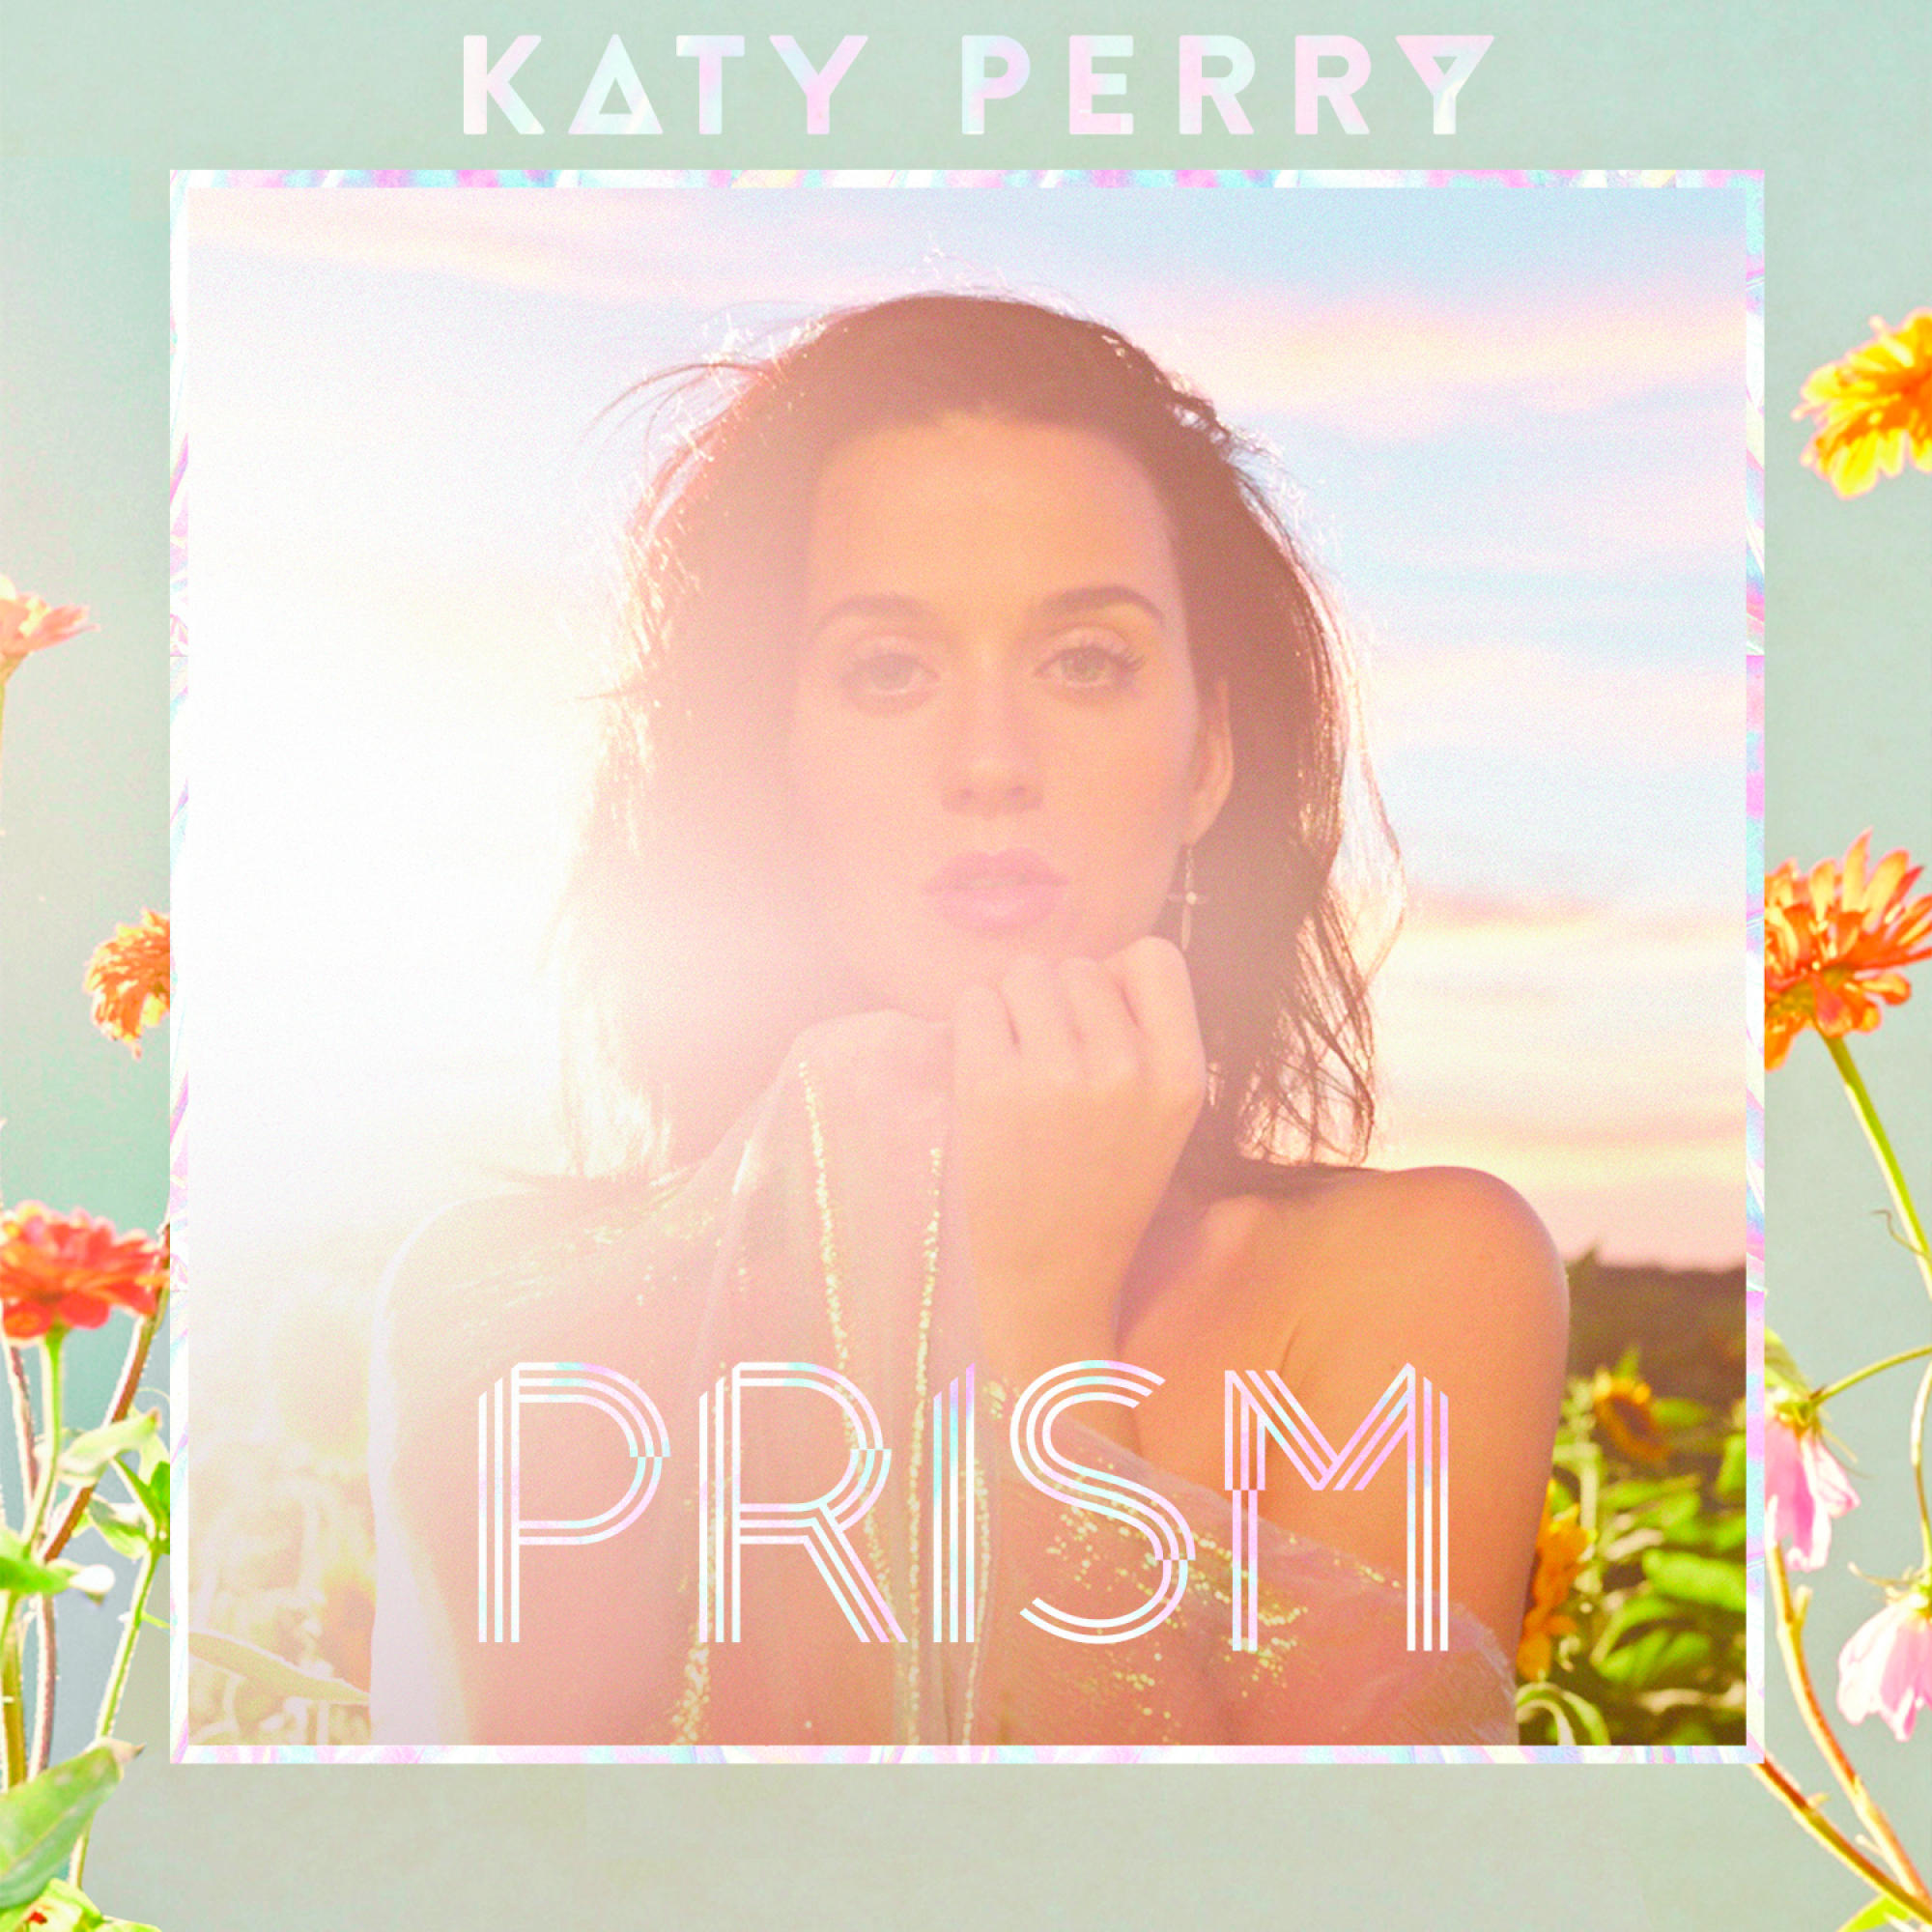 Katy Perry - Prism - (CD)